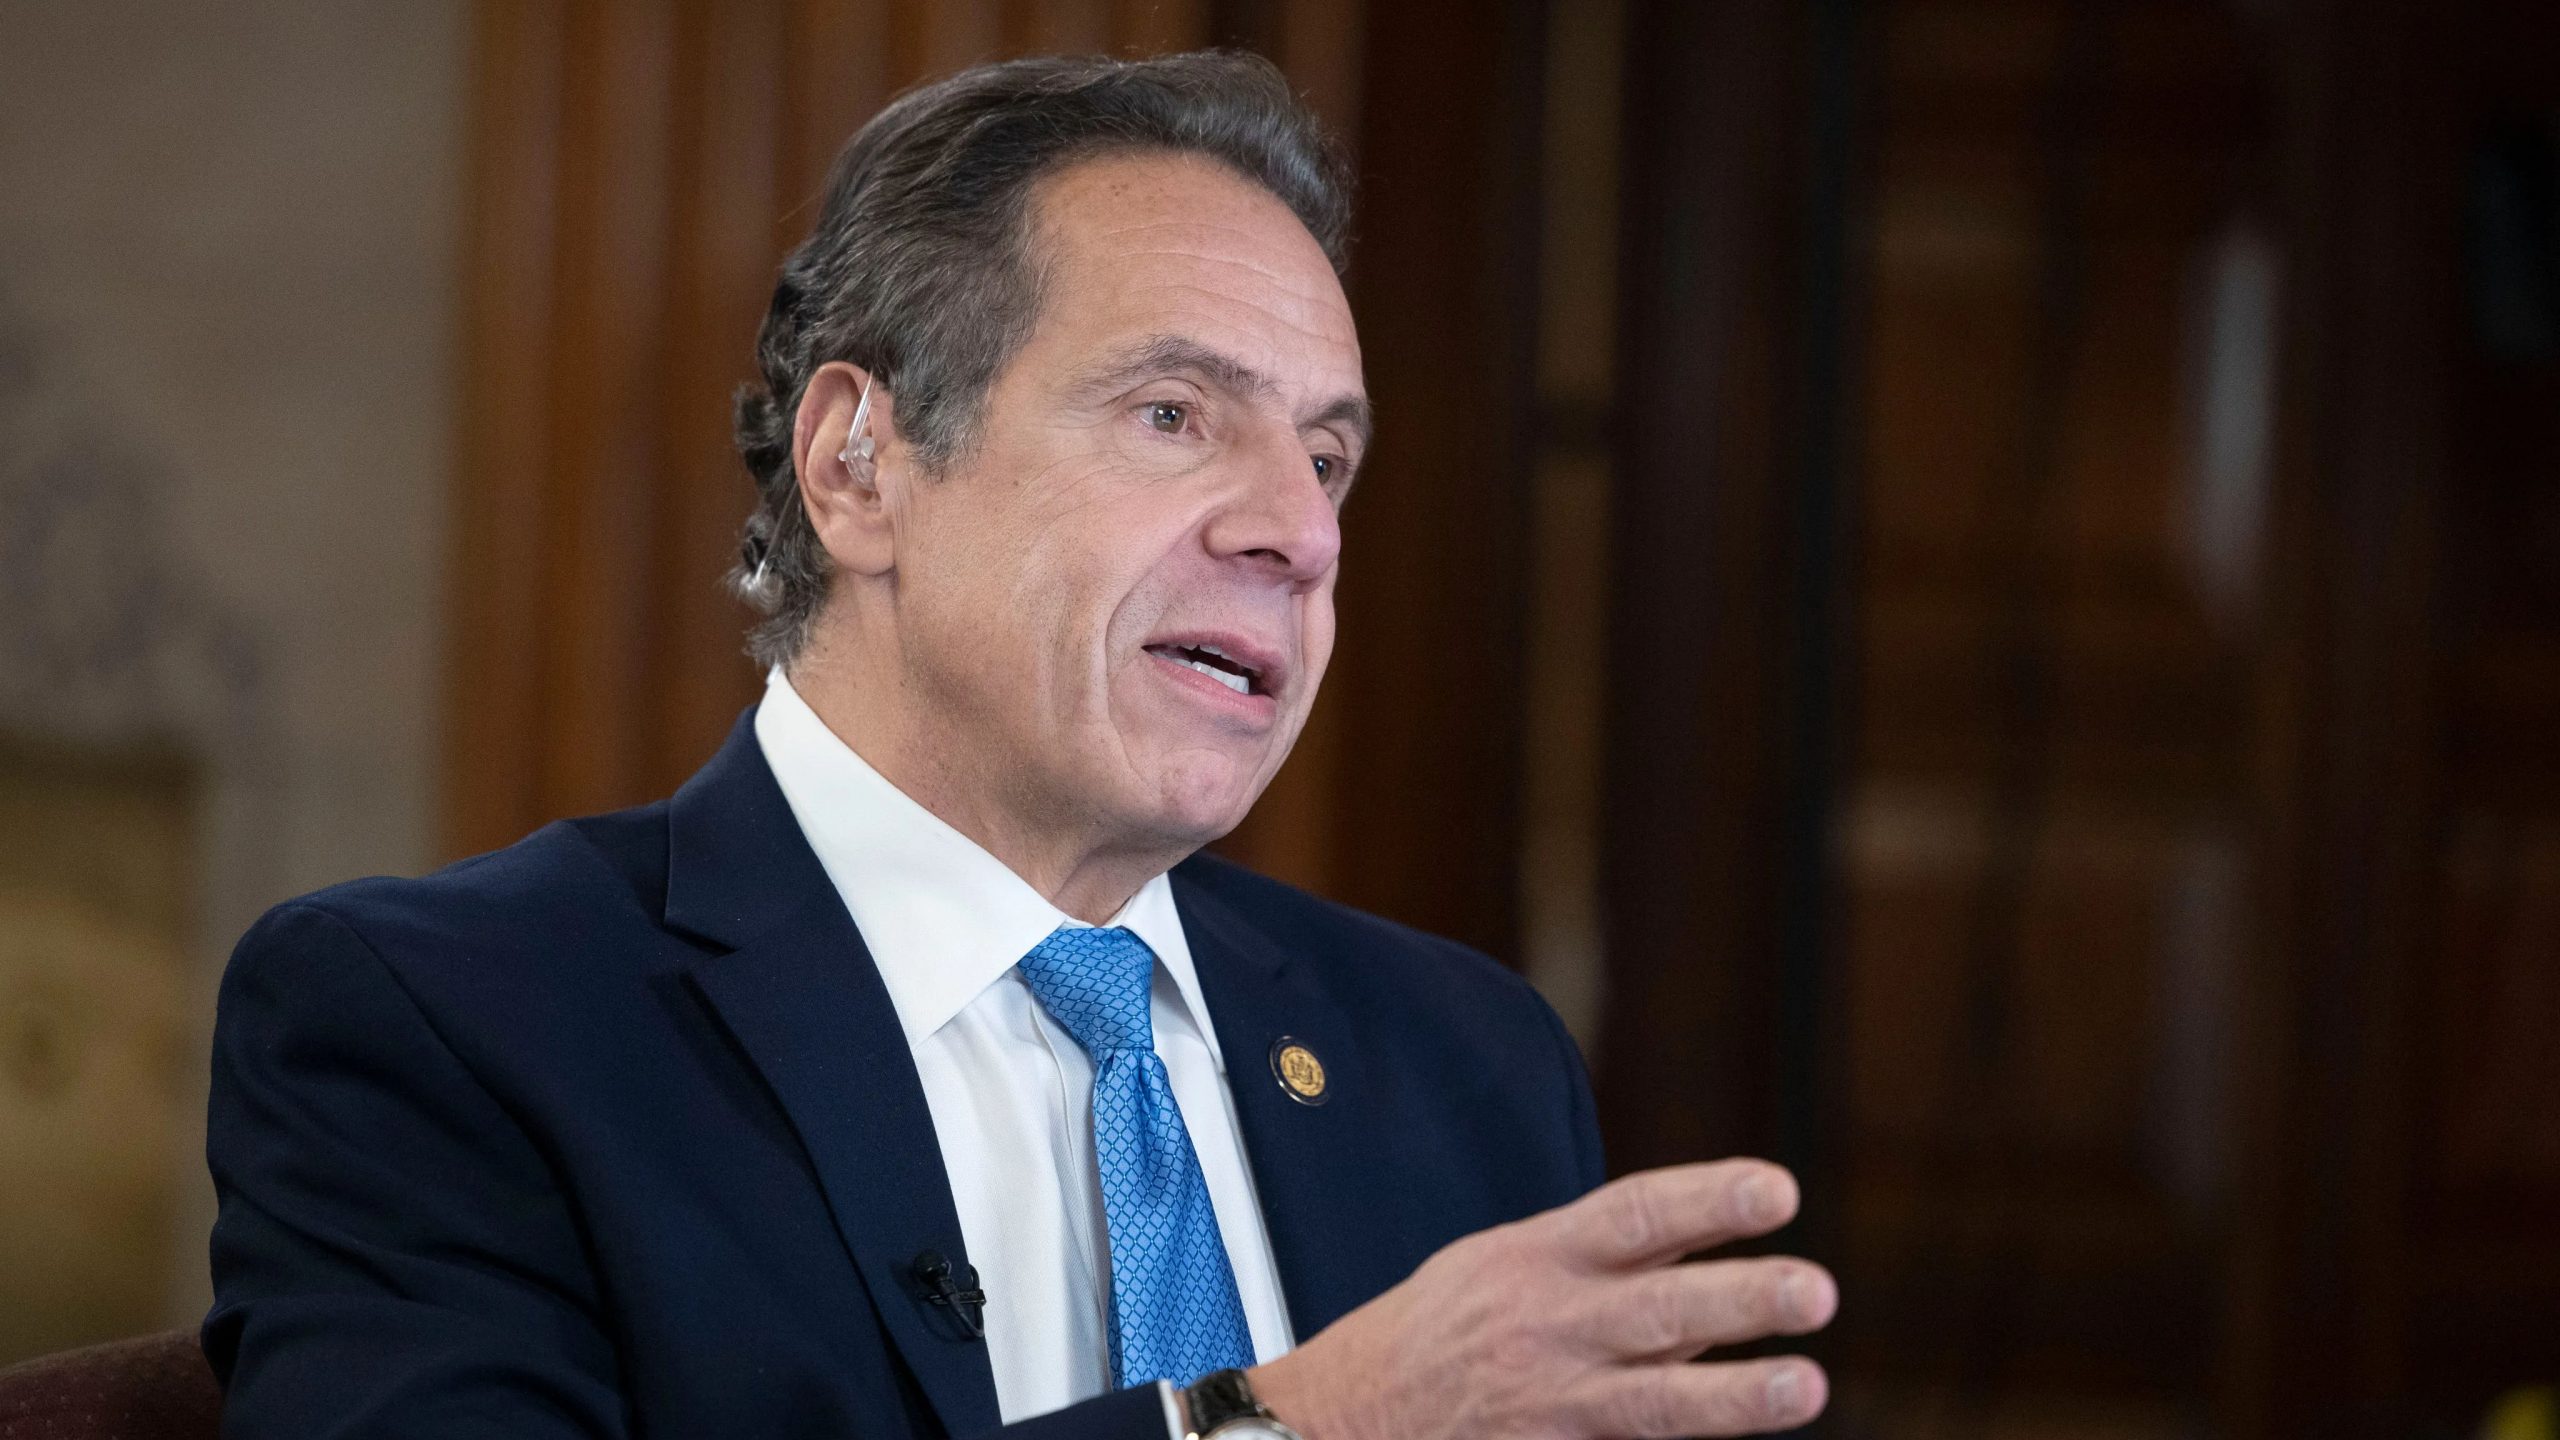 NY Attorney General to launch an independent investigation against Governor Andrew Cuomo